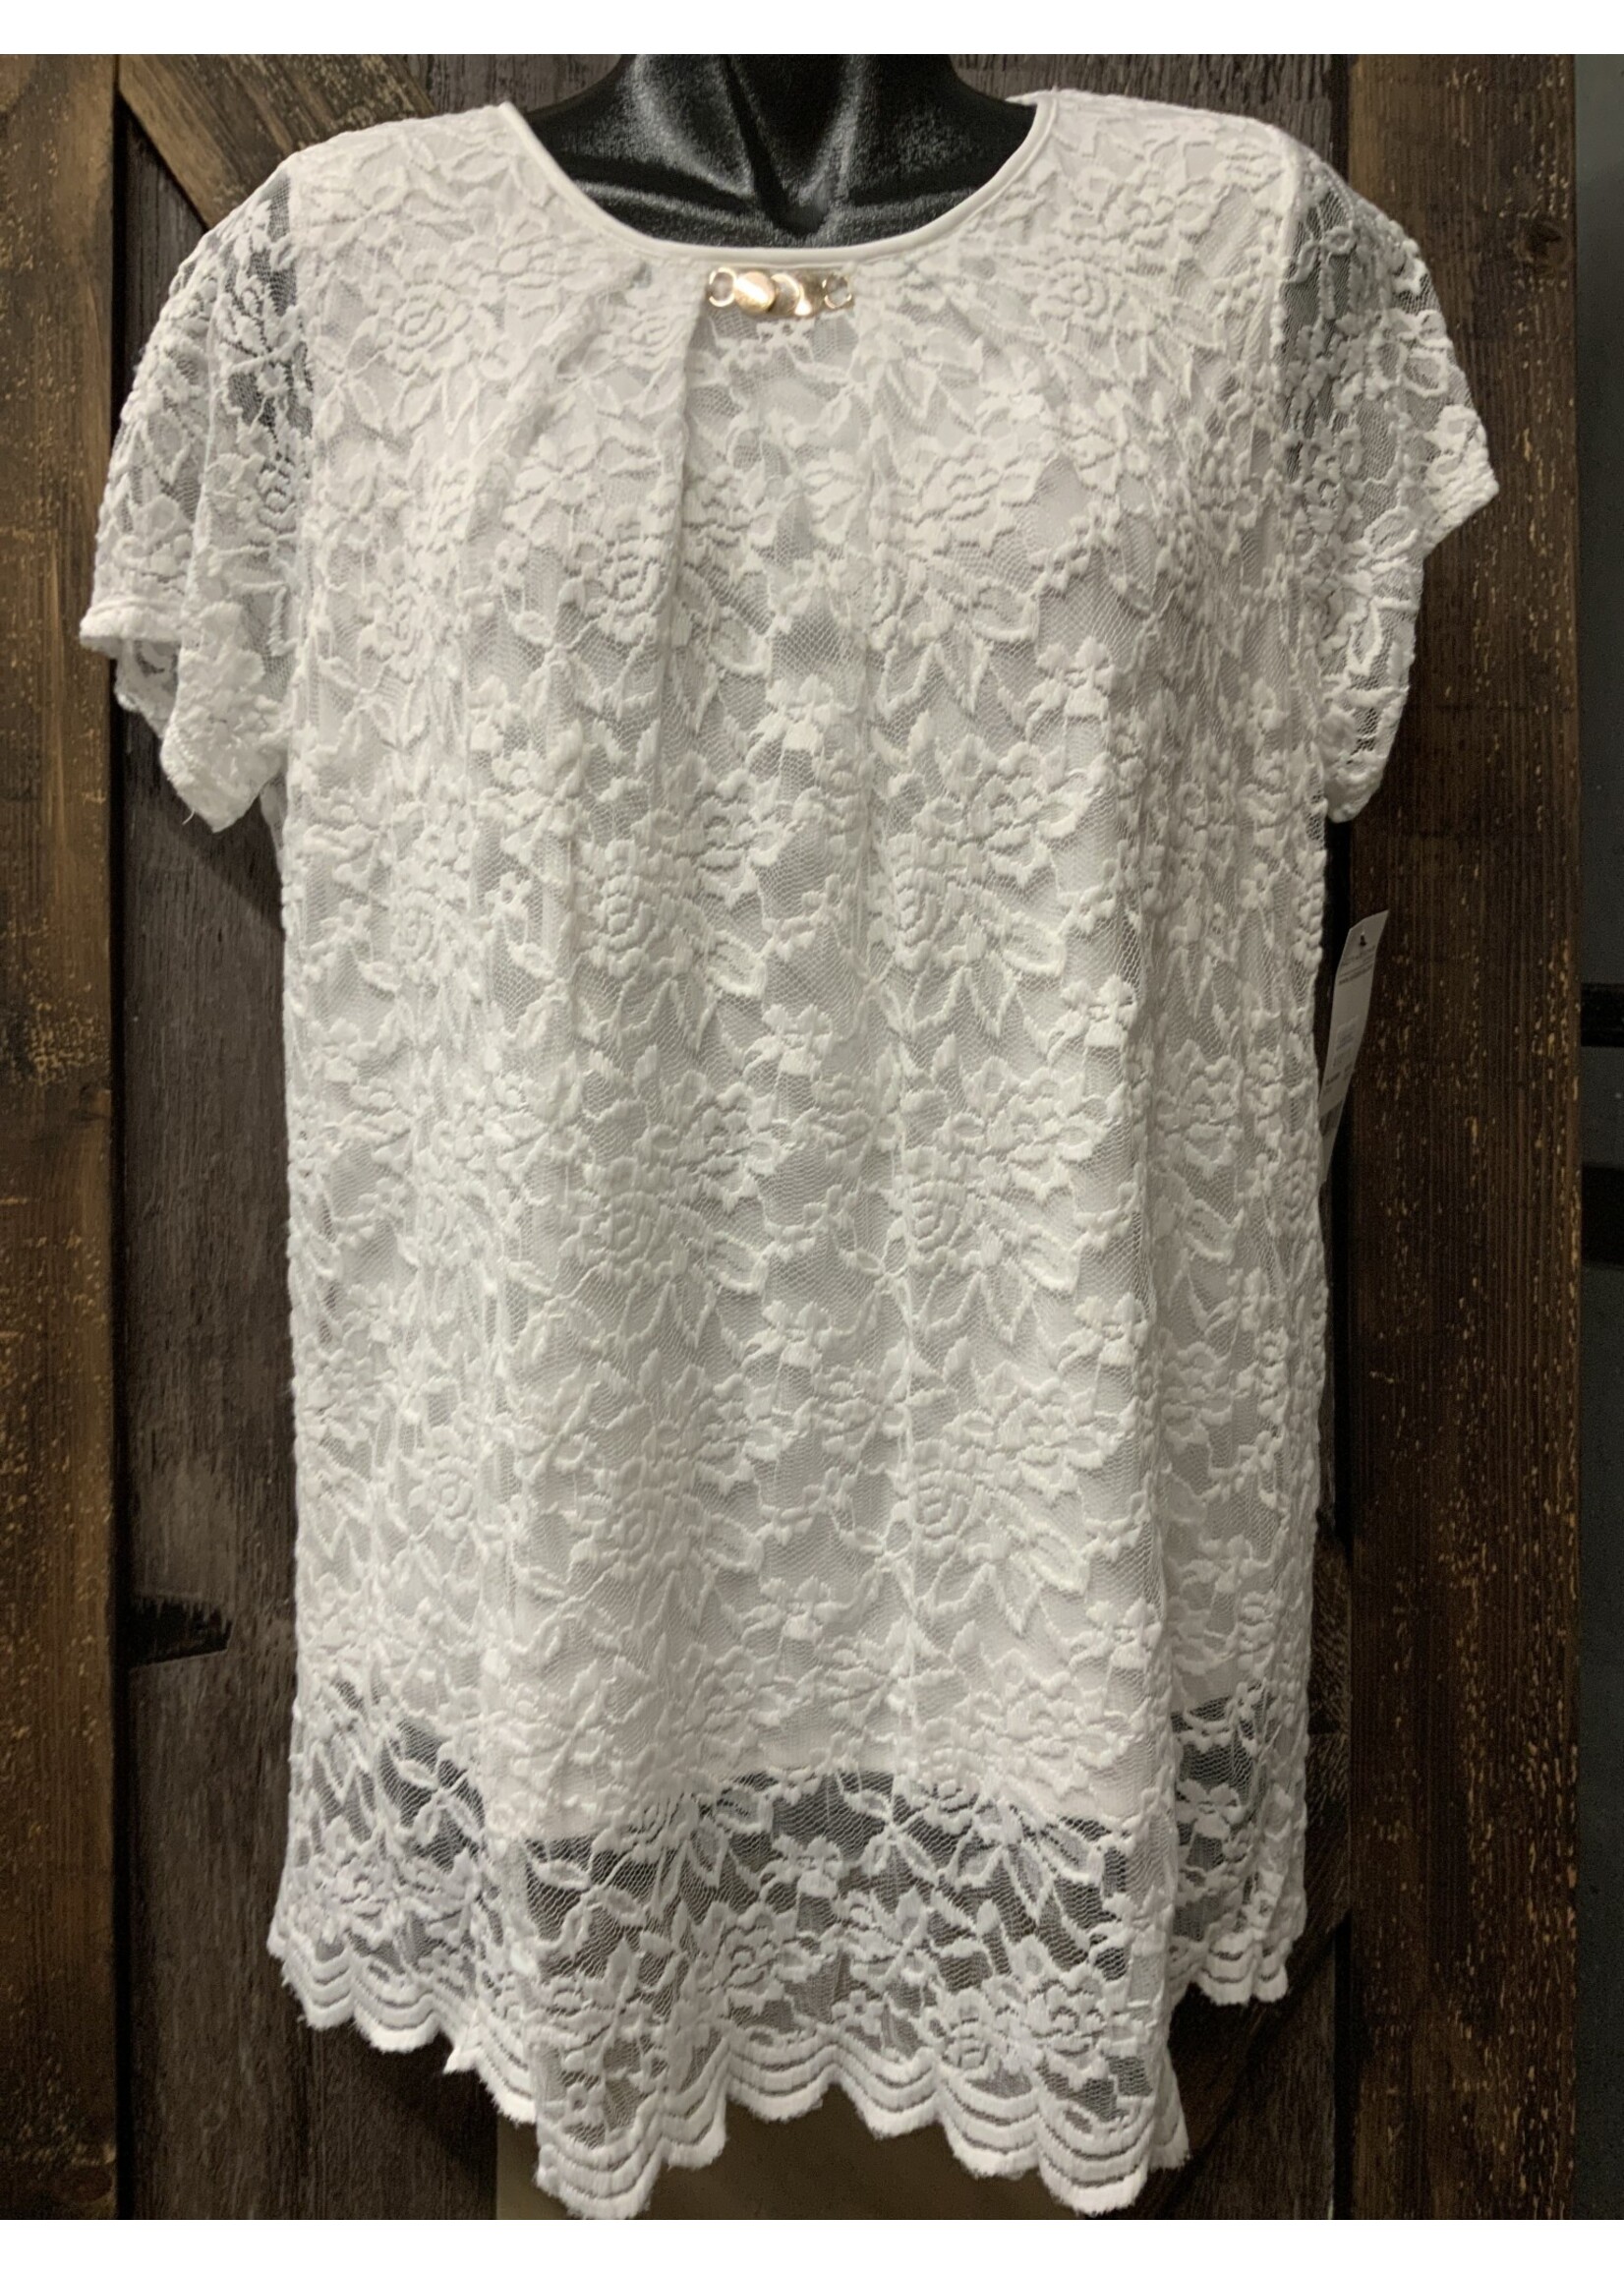 Notations LADIES LACE WHITE TOP 3X